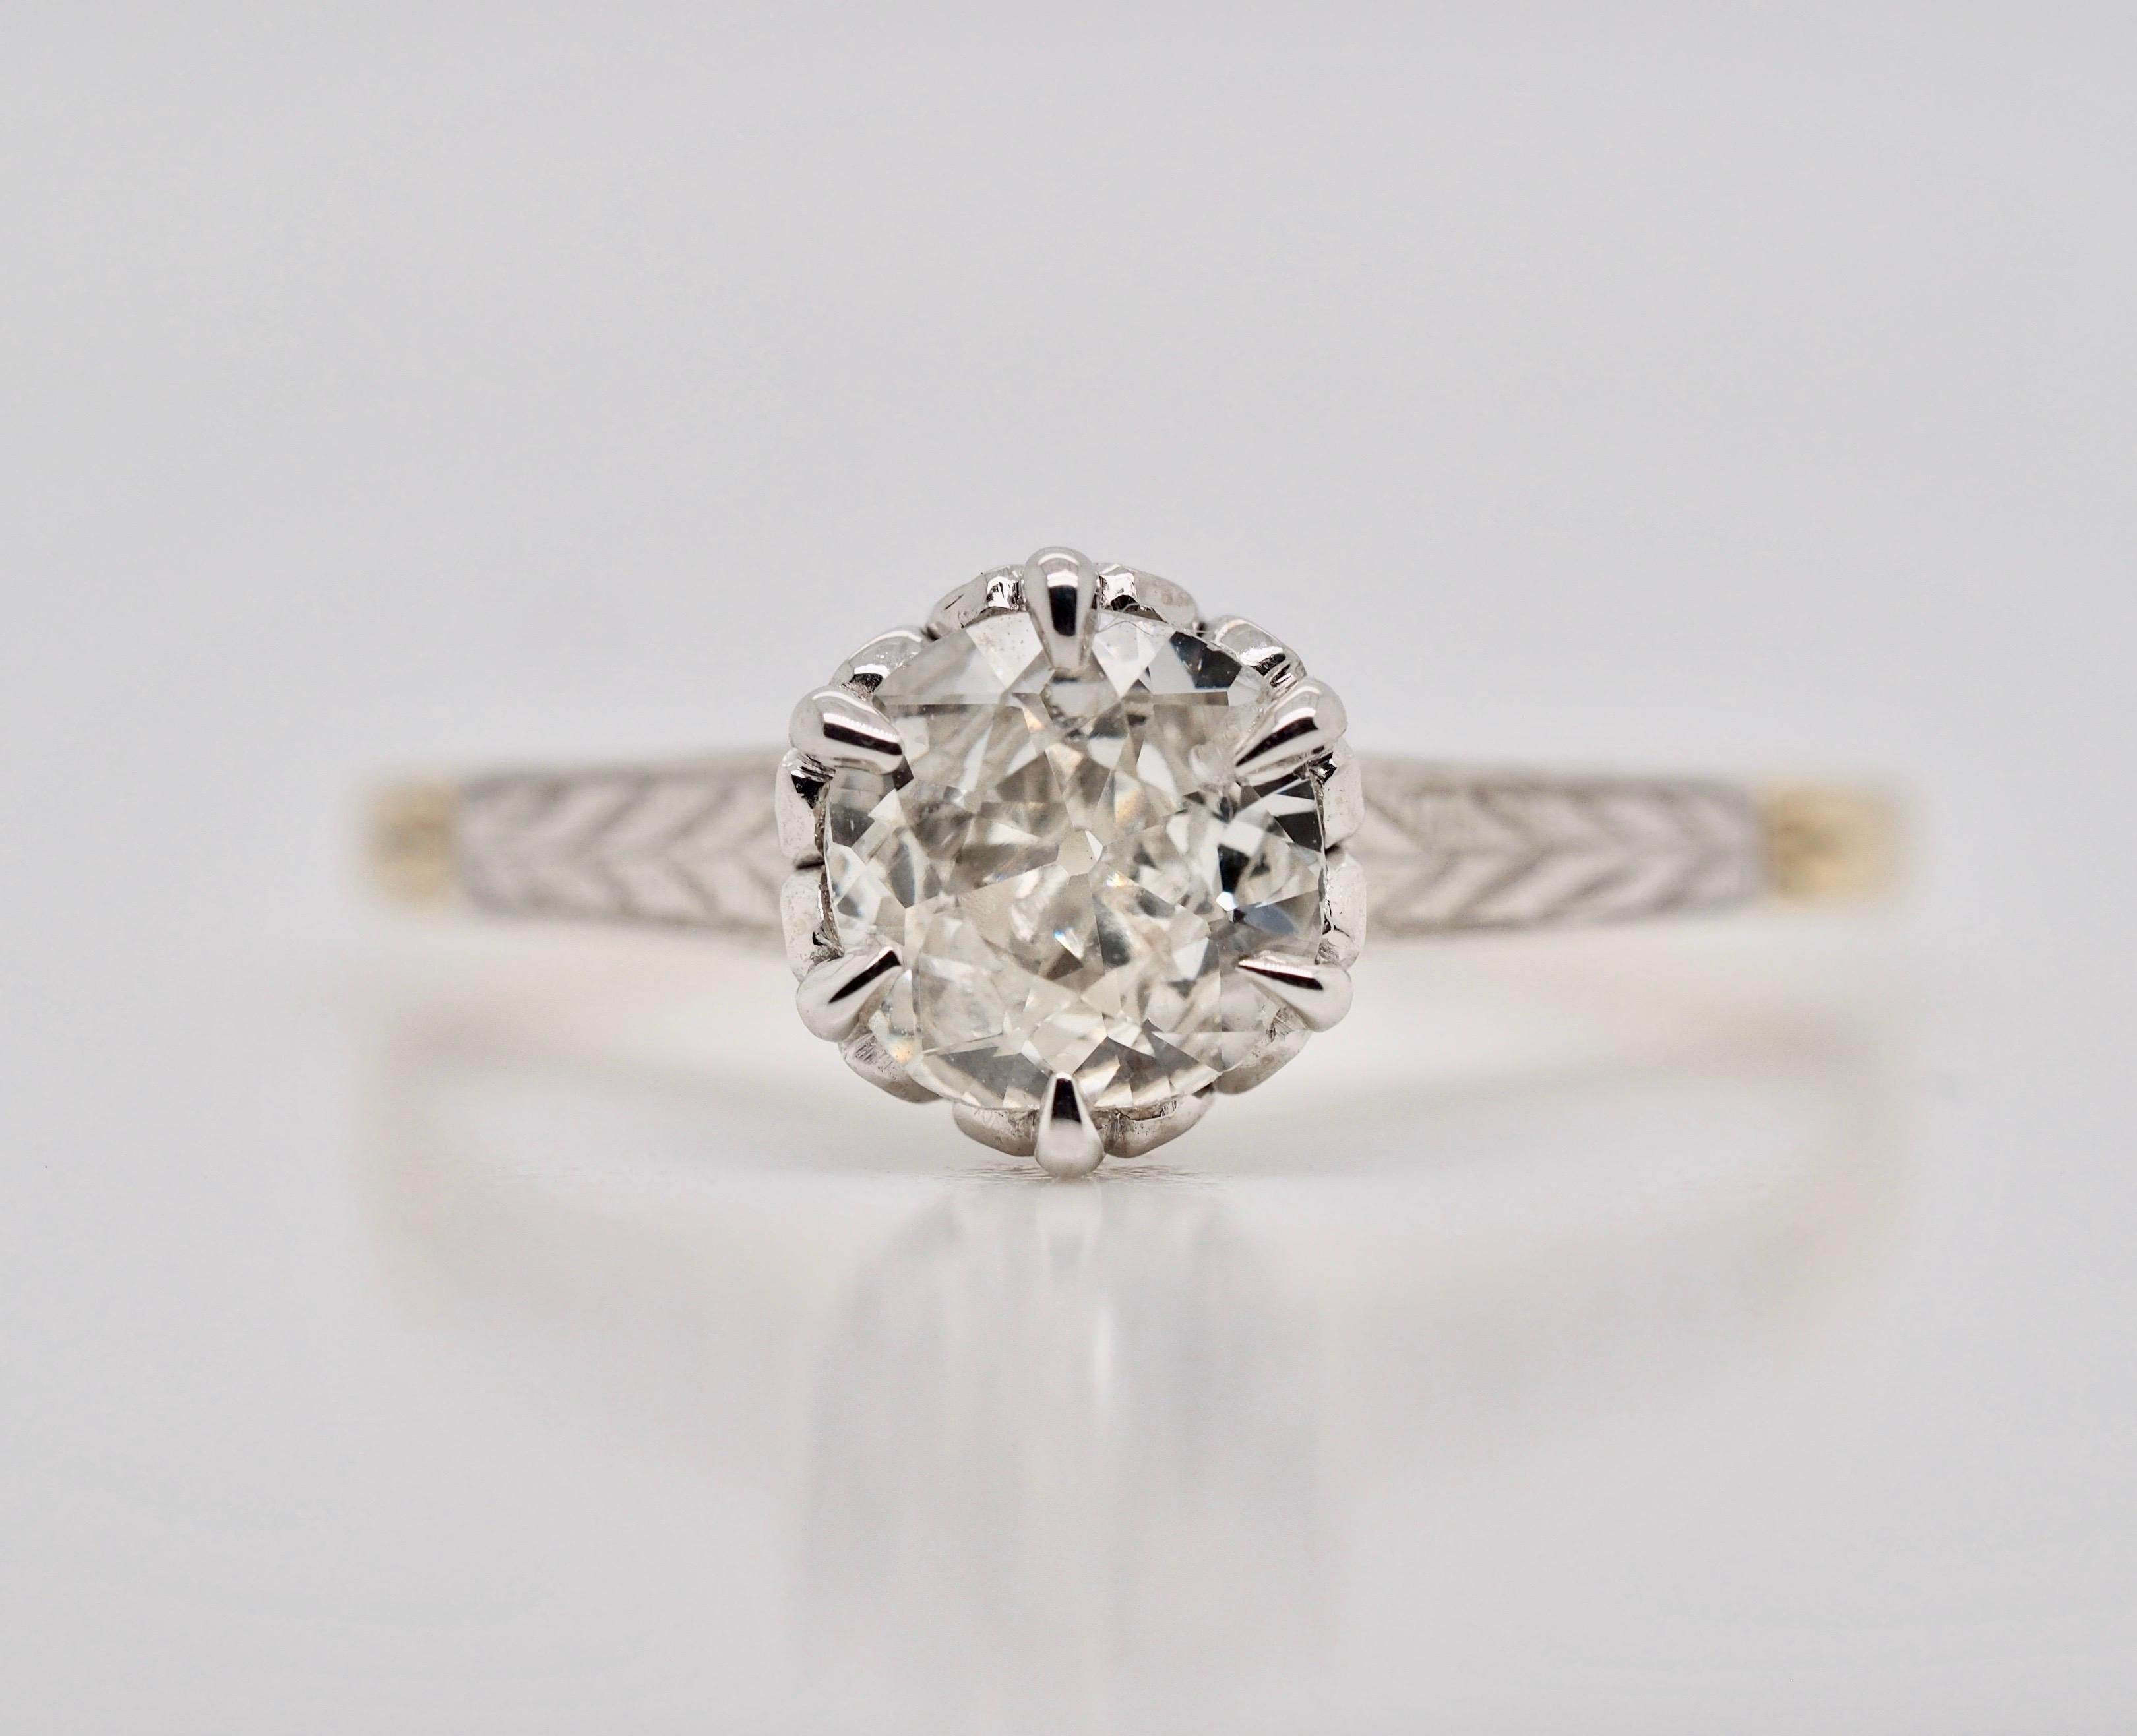 This amazing 10 karat yellow and white gold Art Deco solitaire engagement ring with six claw-prongs holds an Old Mine Cut Diamond measuring  5.90 - 5.63 x 2.65 mm and weighing approximately .53 carats I clarity  J - K in color. The prongs and 1/3